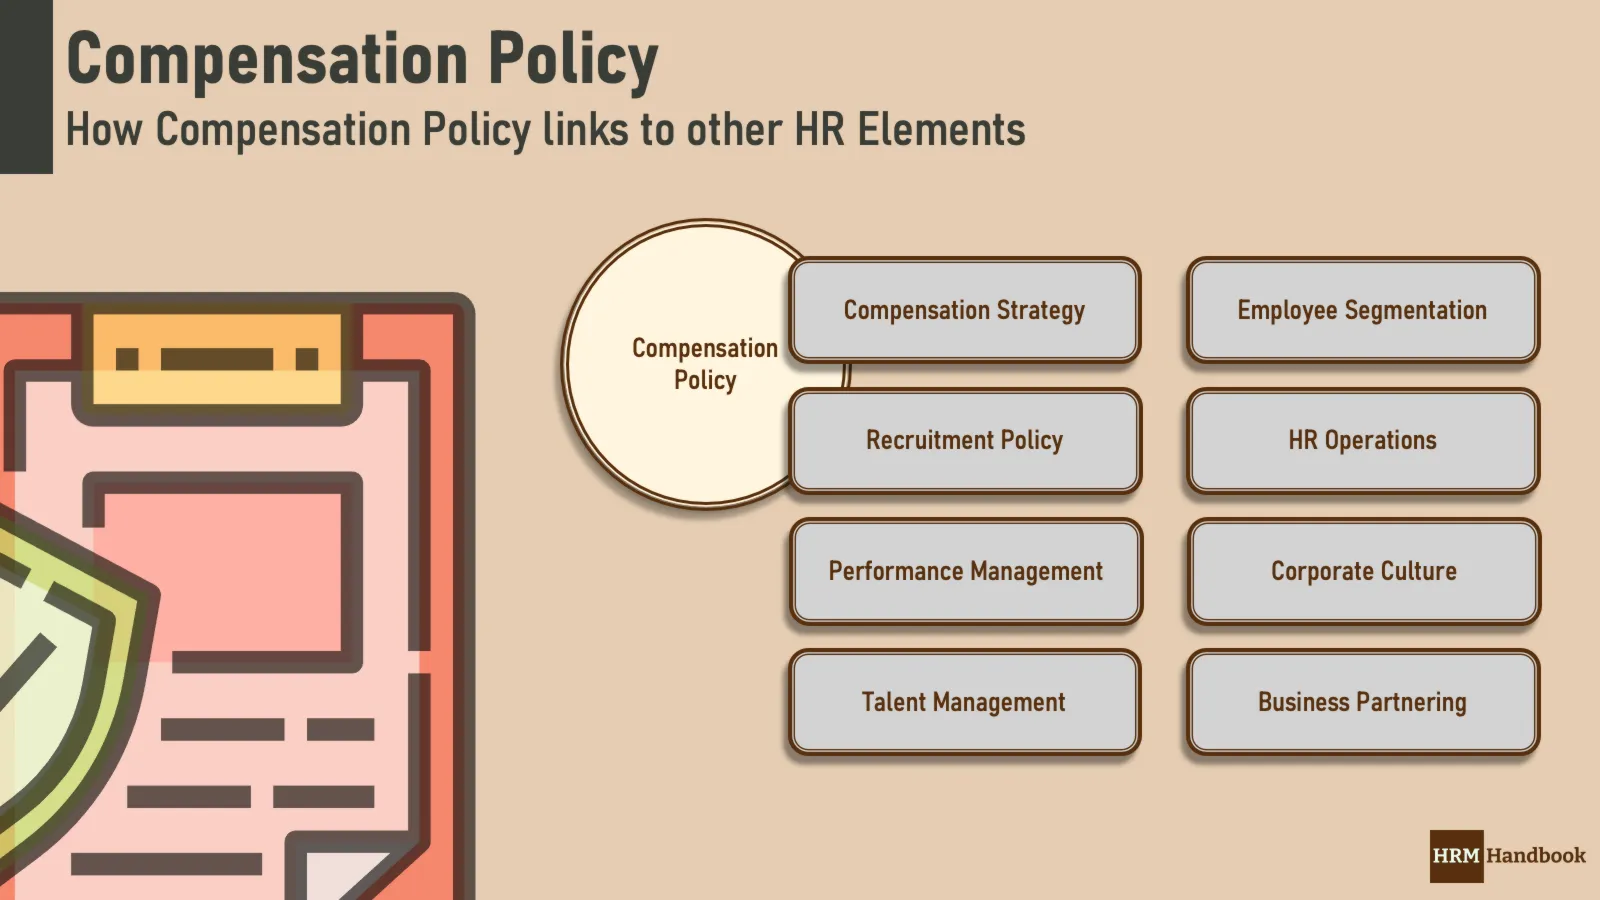 Compensation Policy and how it links to other HR Processes and Elements